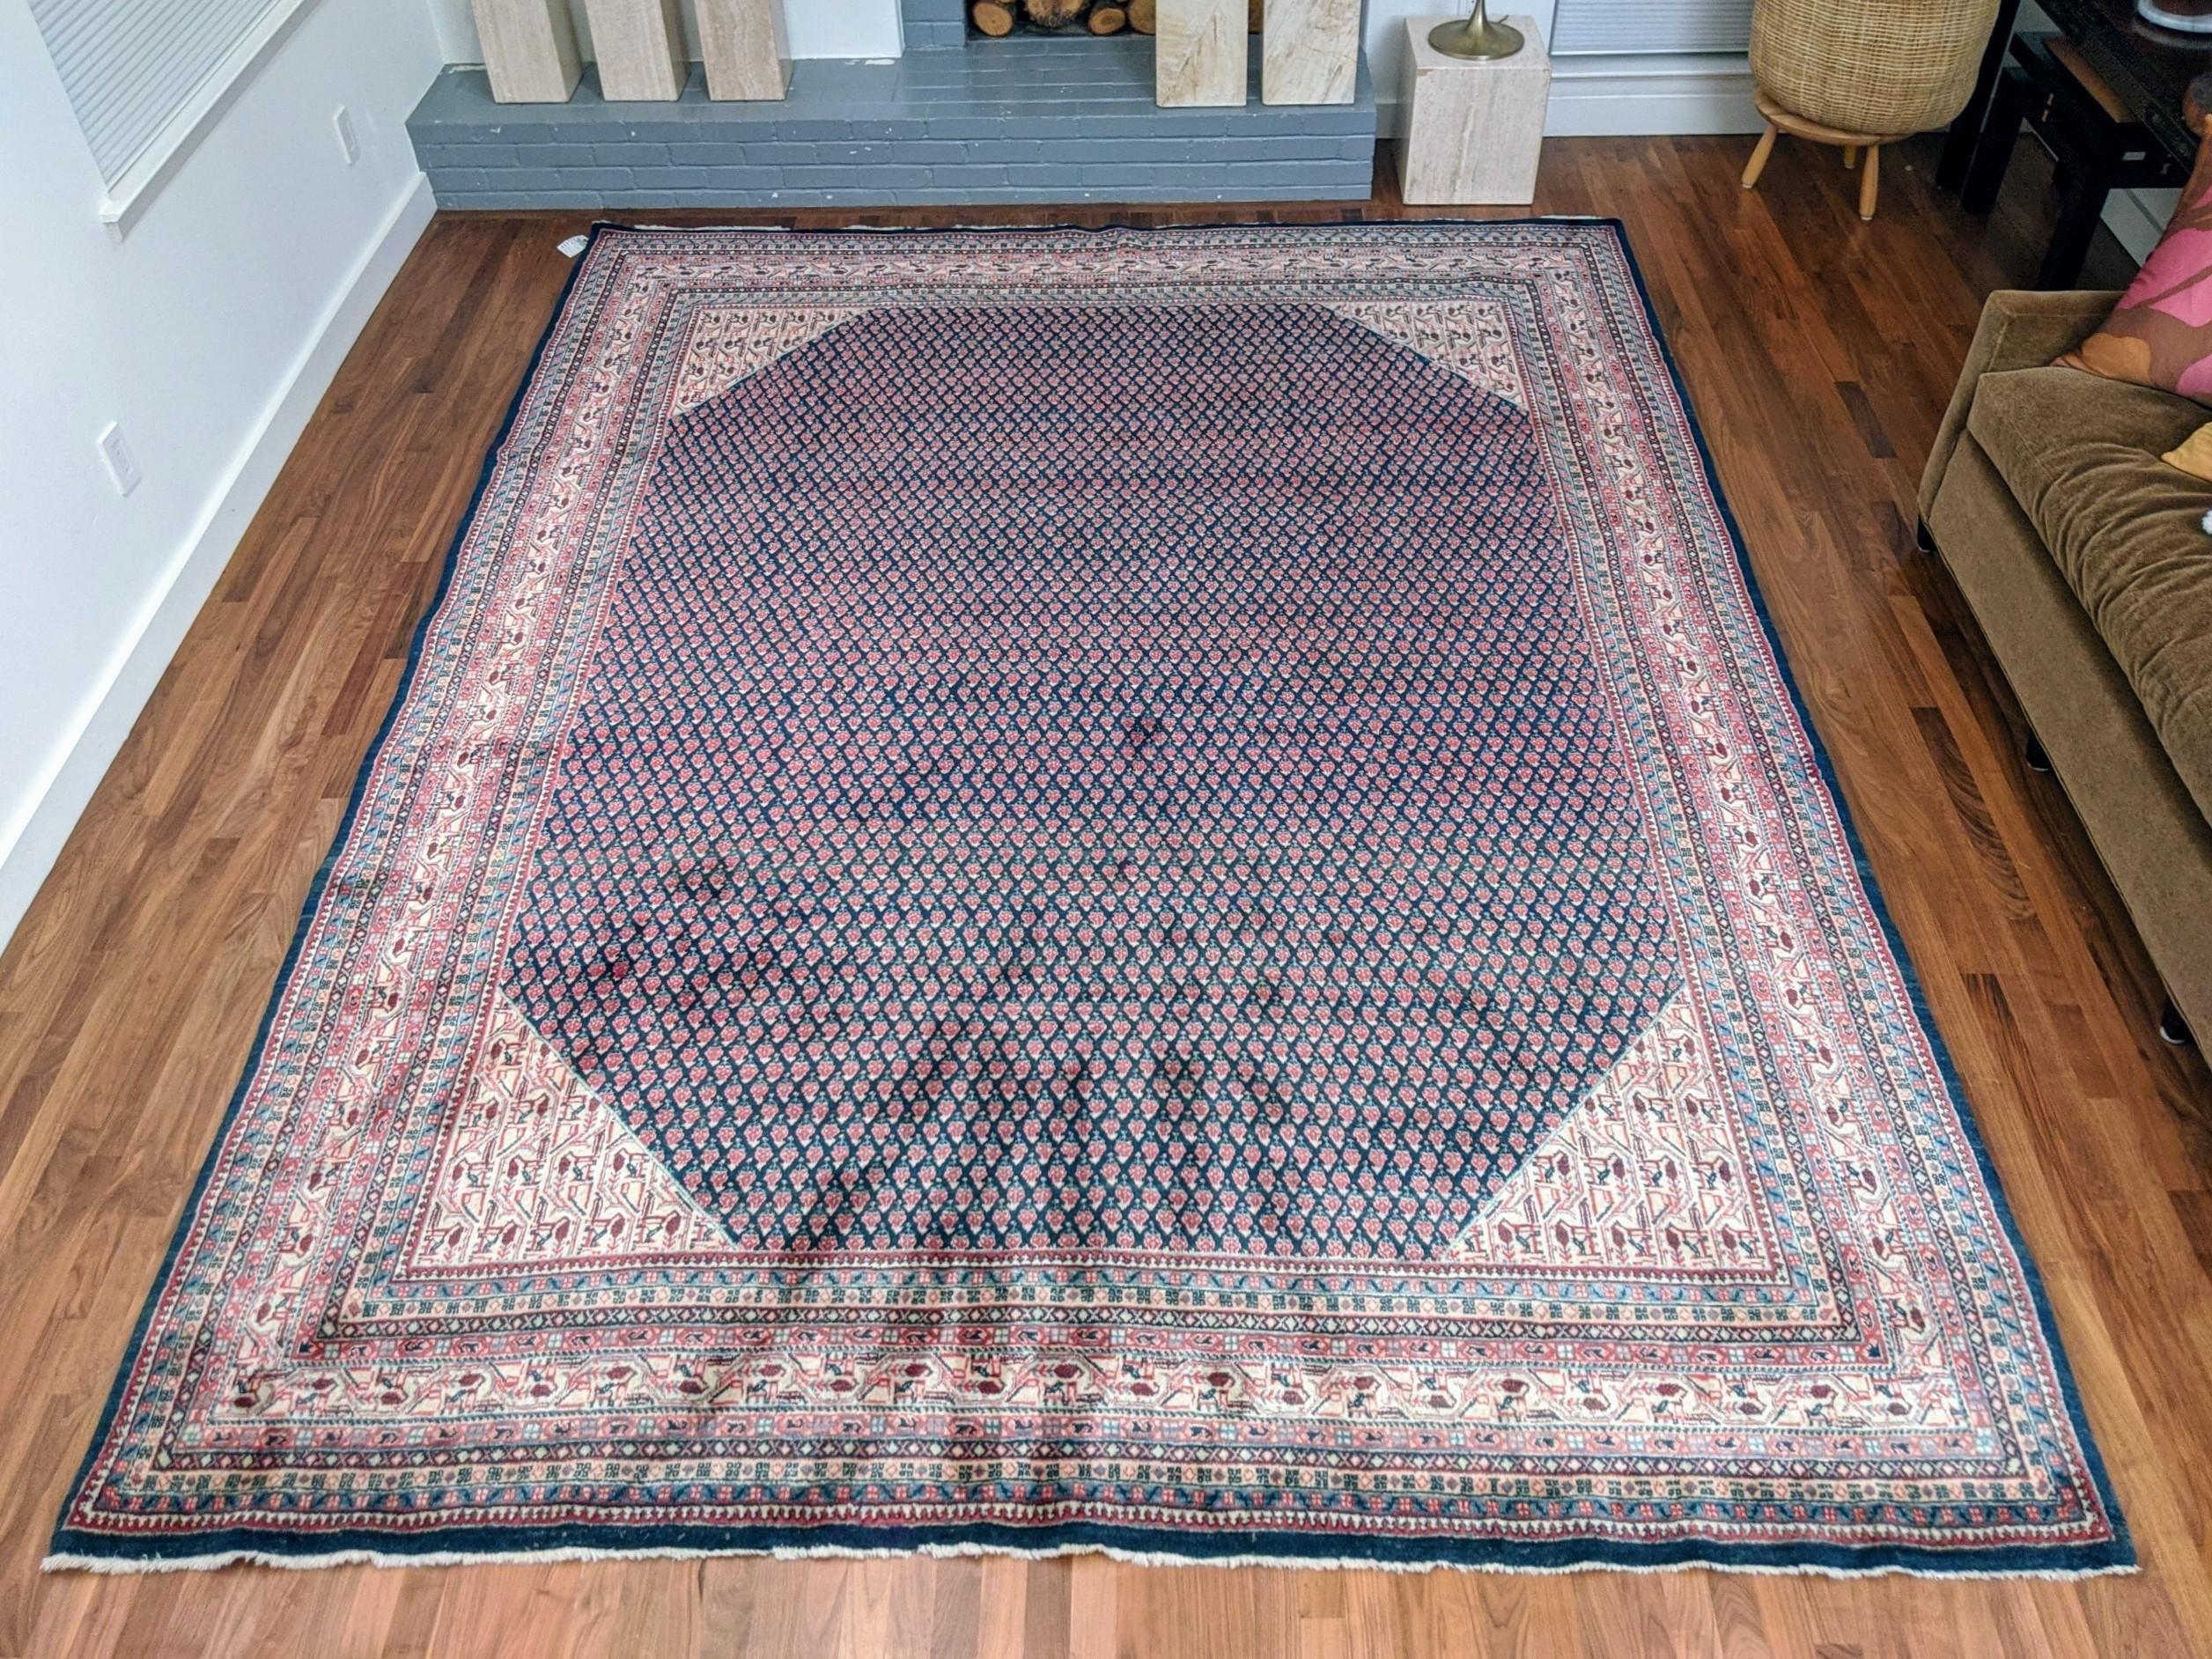 Authentic Handknotted Persian Mir 1940s Rug 9'x12' For Sale 4